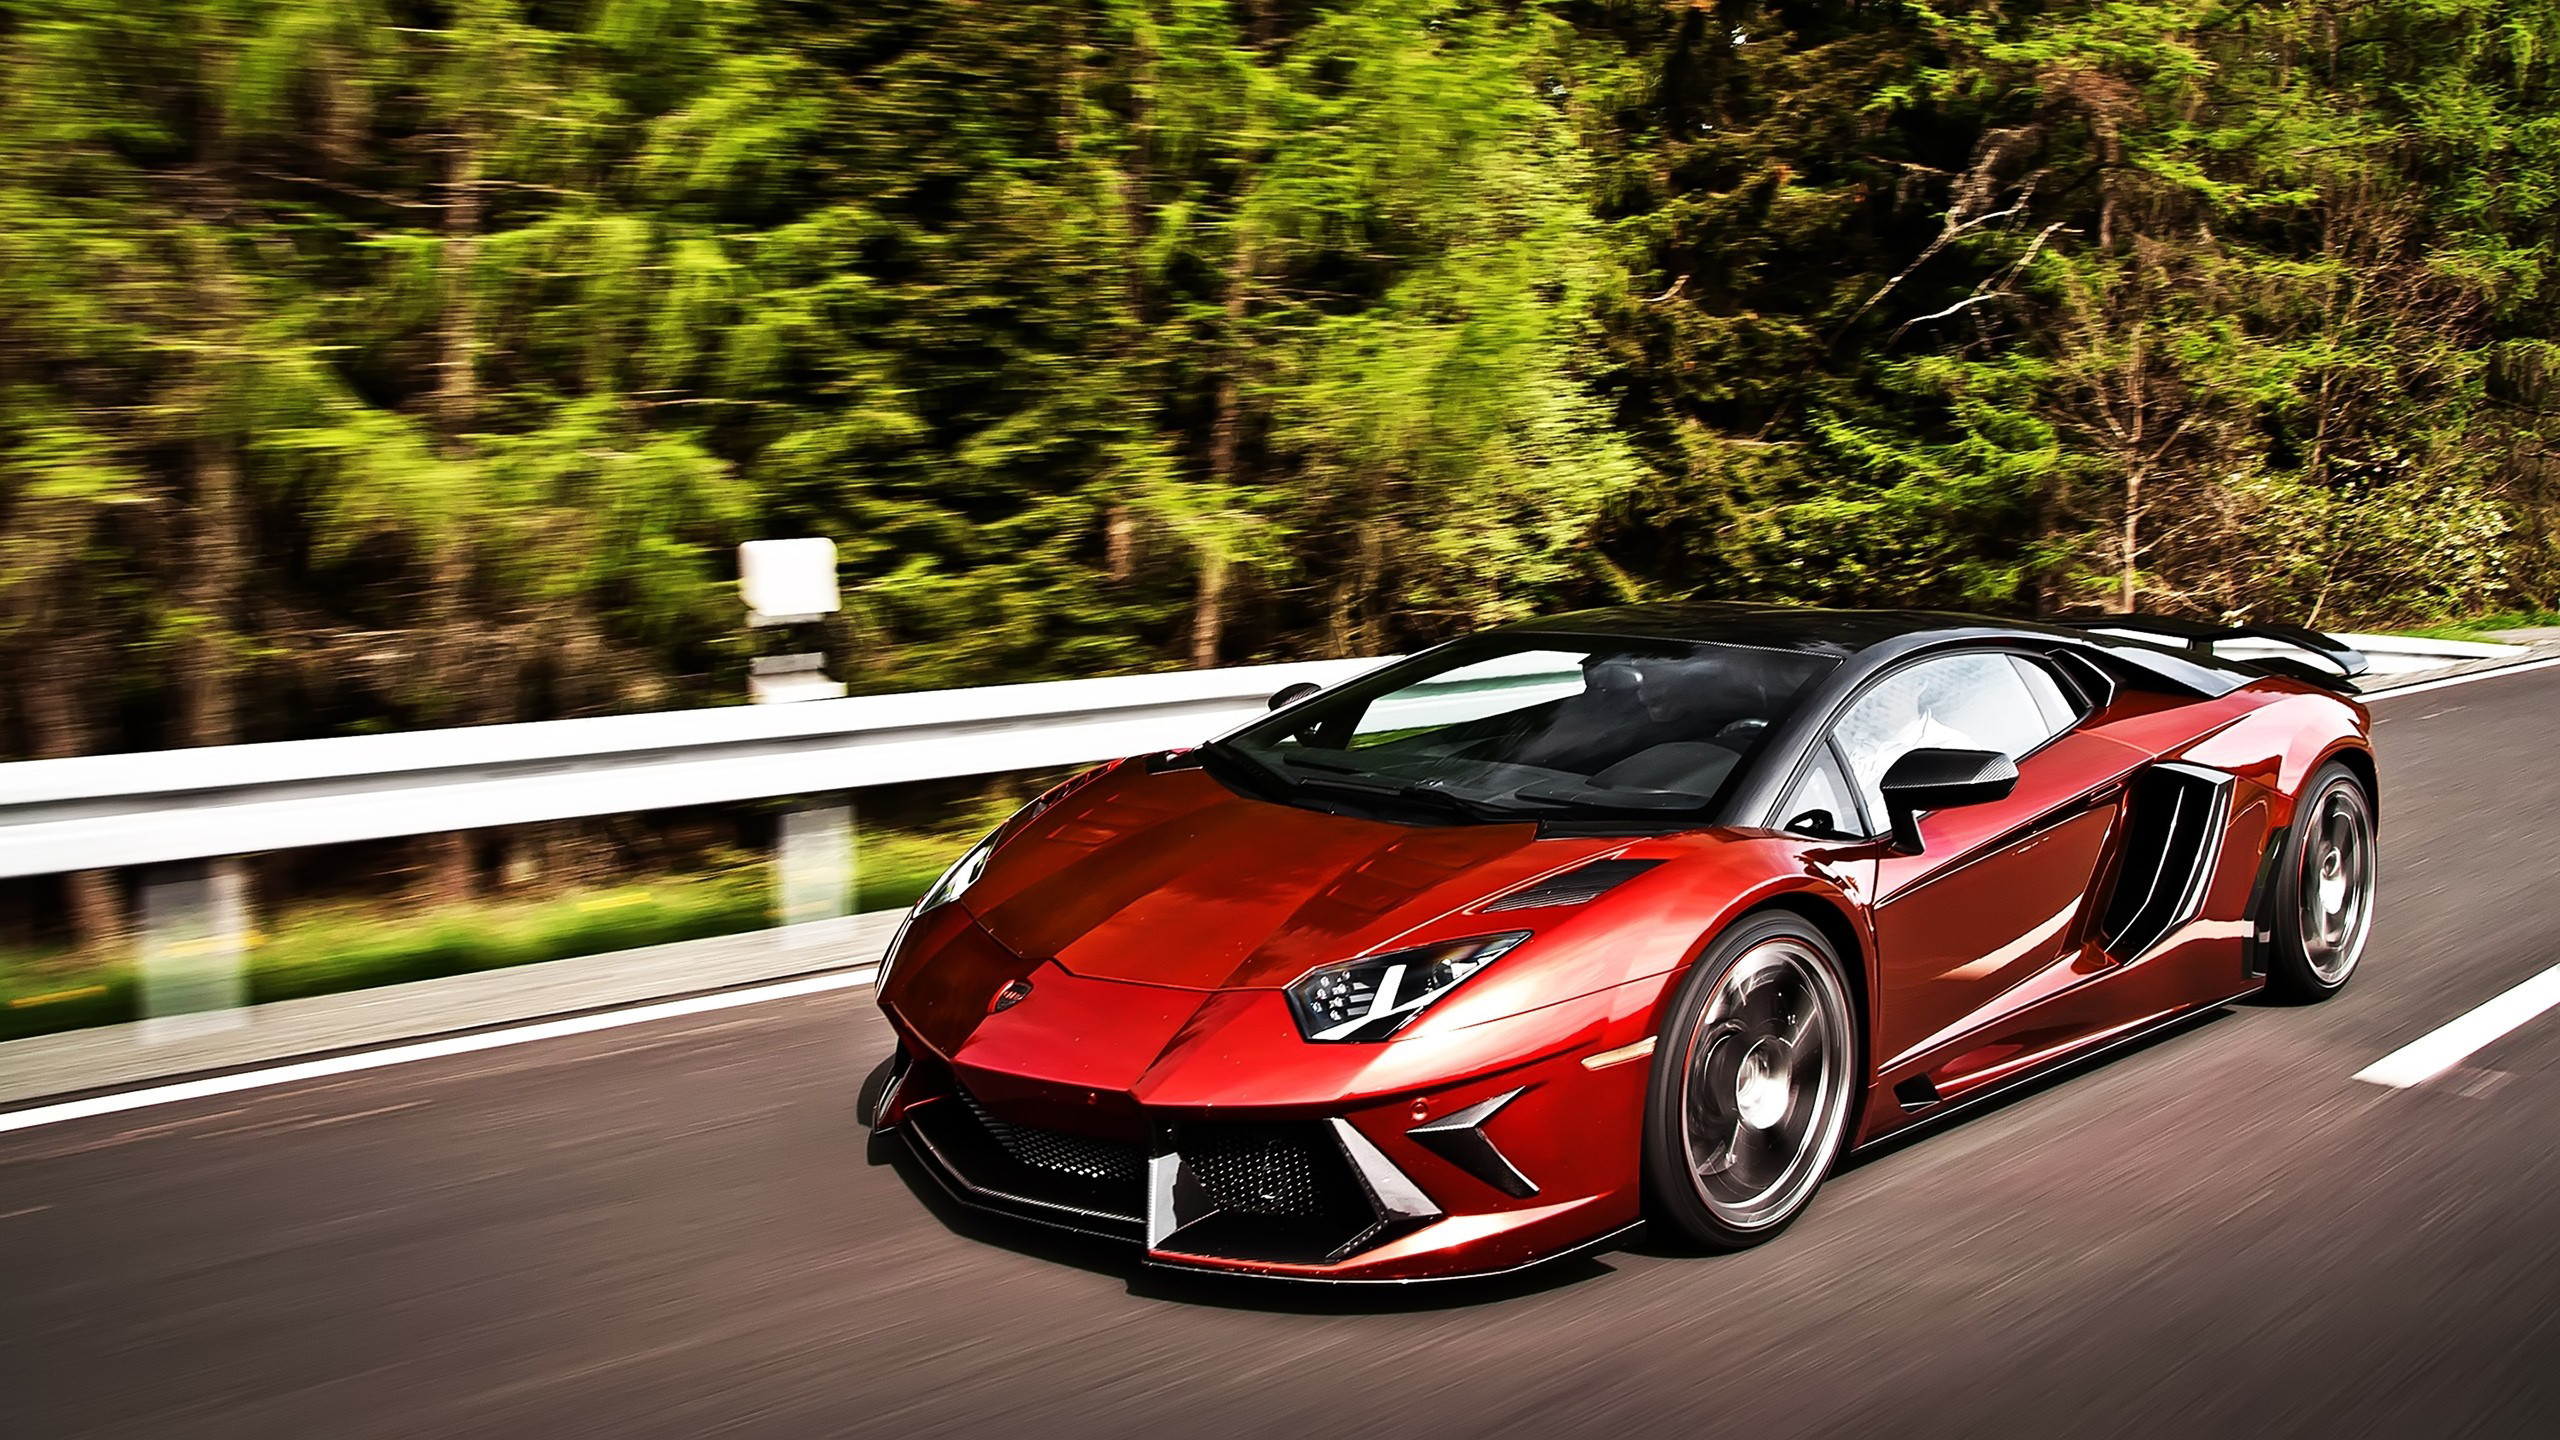 2560x1440 supercar wallpapers 31169